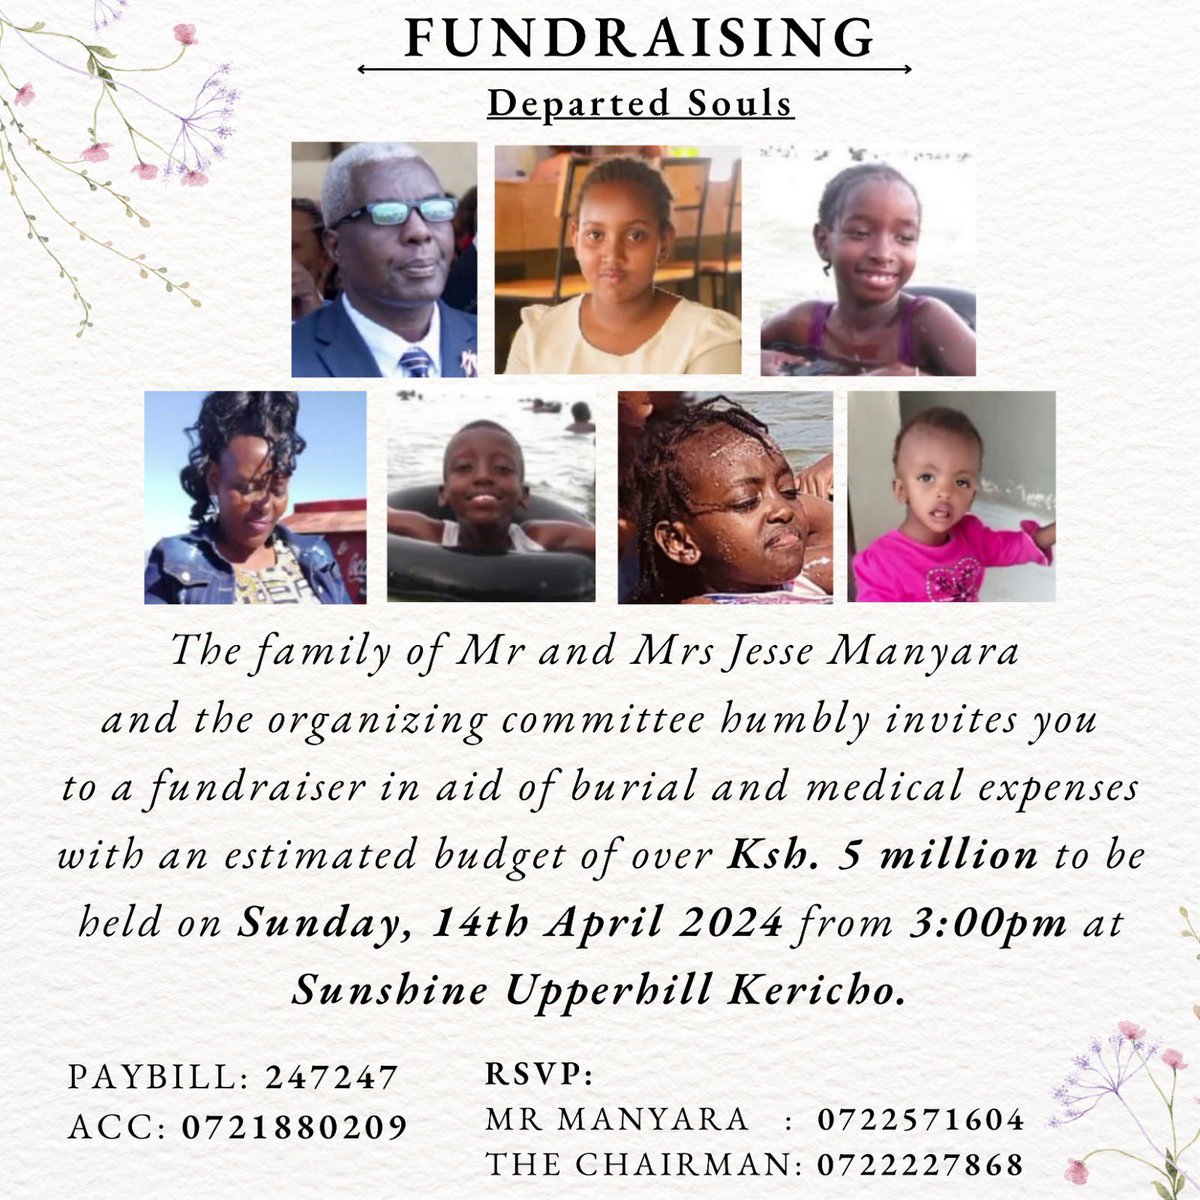 Every contribution matters in helping the Manyara family cope with the loss of their loved ones and the recovery of the survivors. Let’s come together as a community to offer our support. #KenyansForManyaras 🕊️ Paybill: 247247 Account: 0721880209 @Ma3Route @sikikasafety